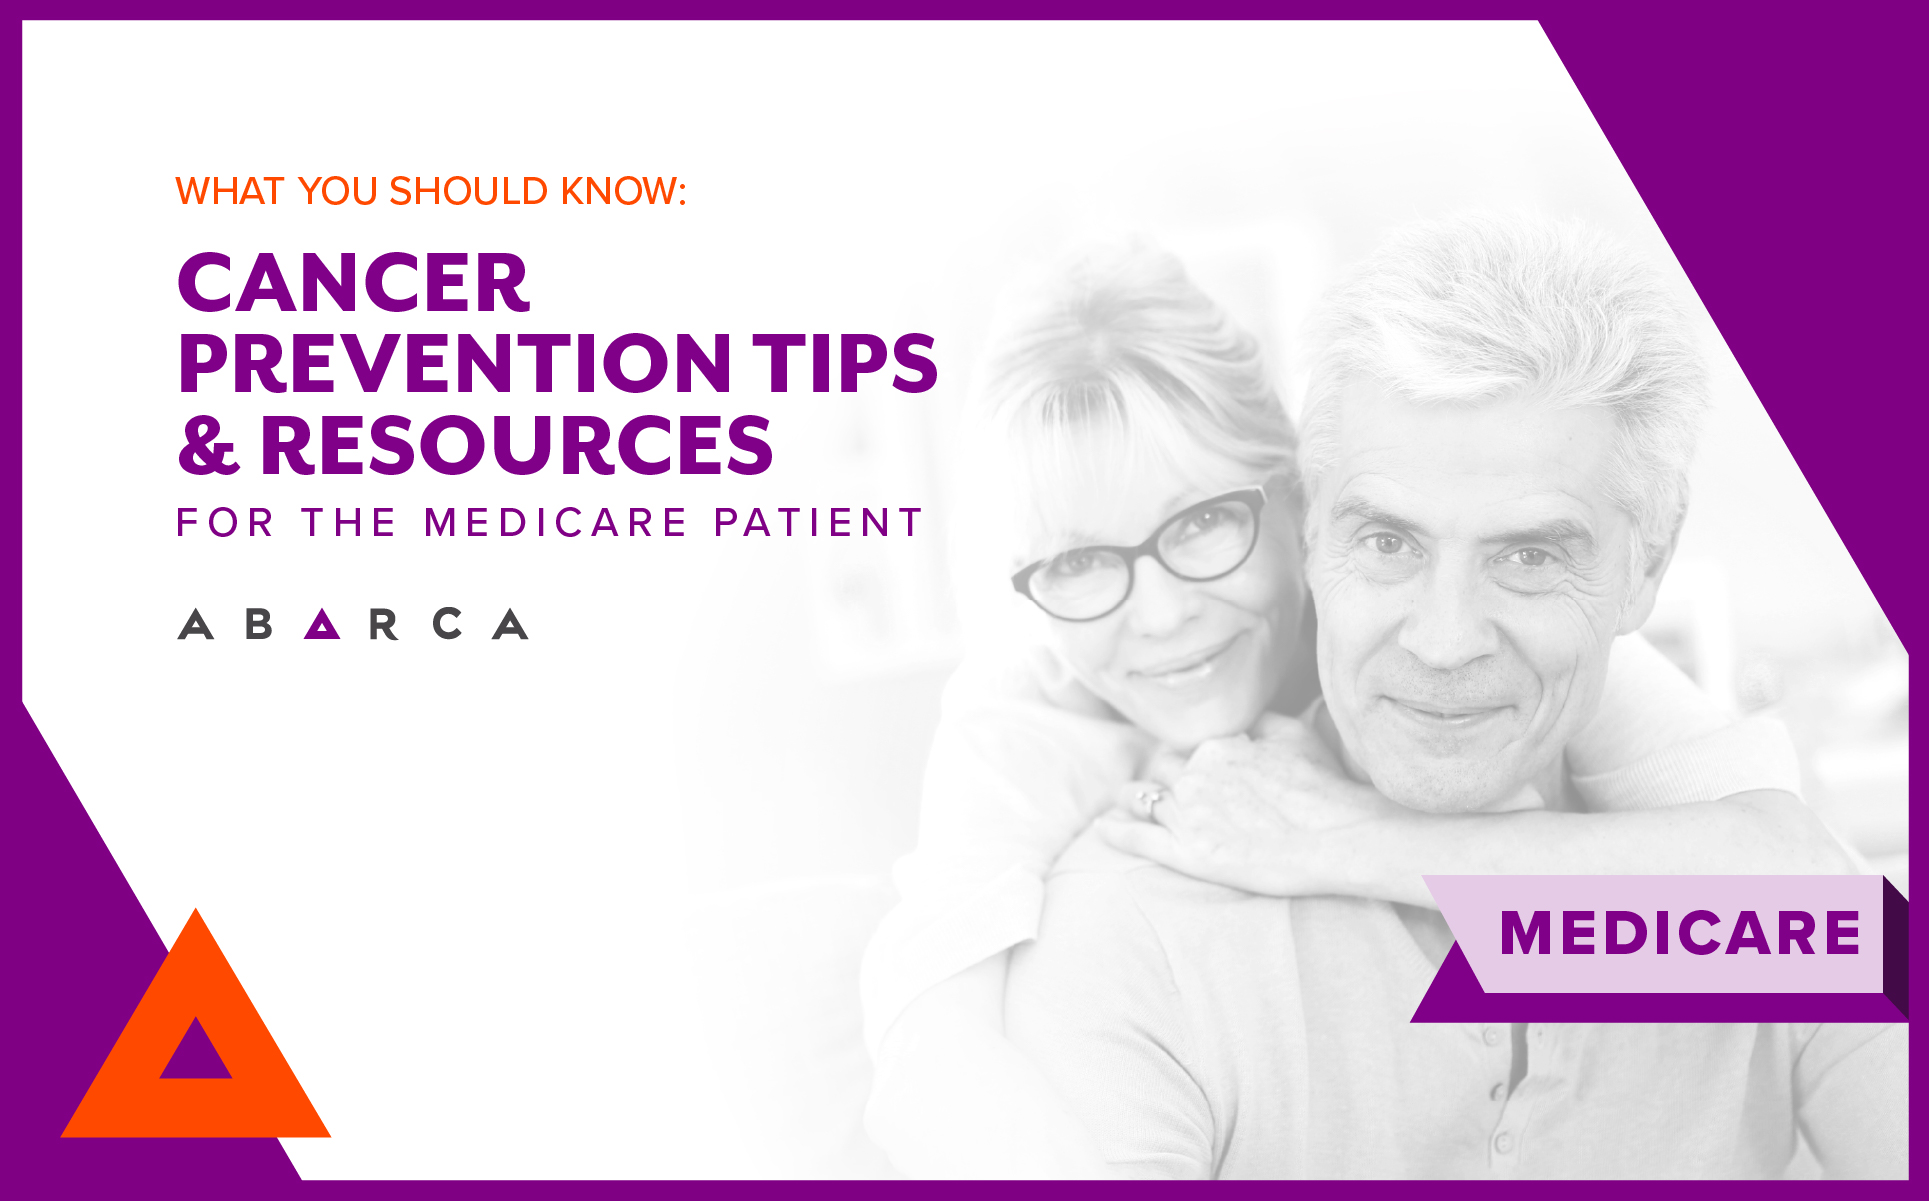 Abarca Health: Cancer Prevention & Coverage for Medicare Patients